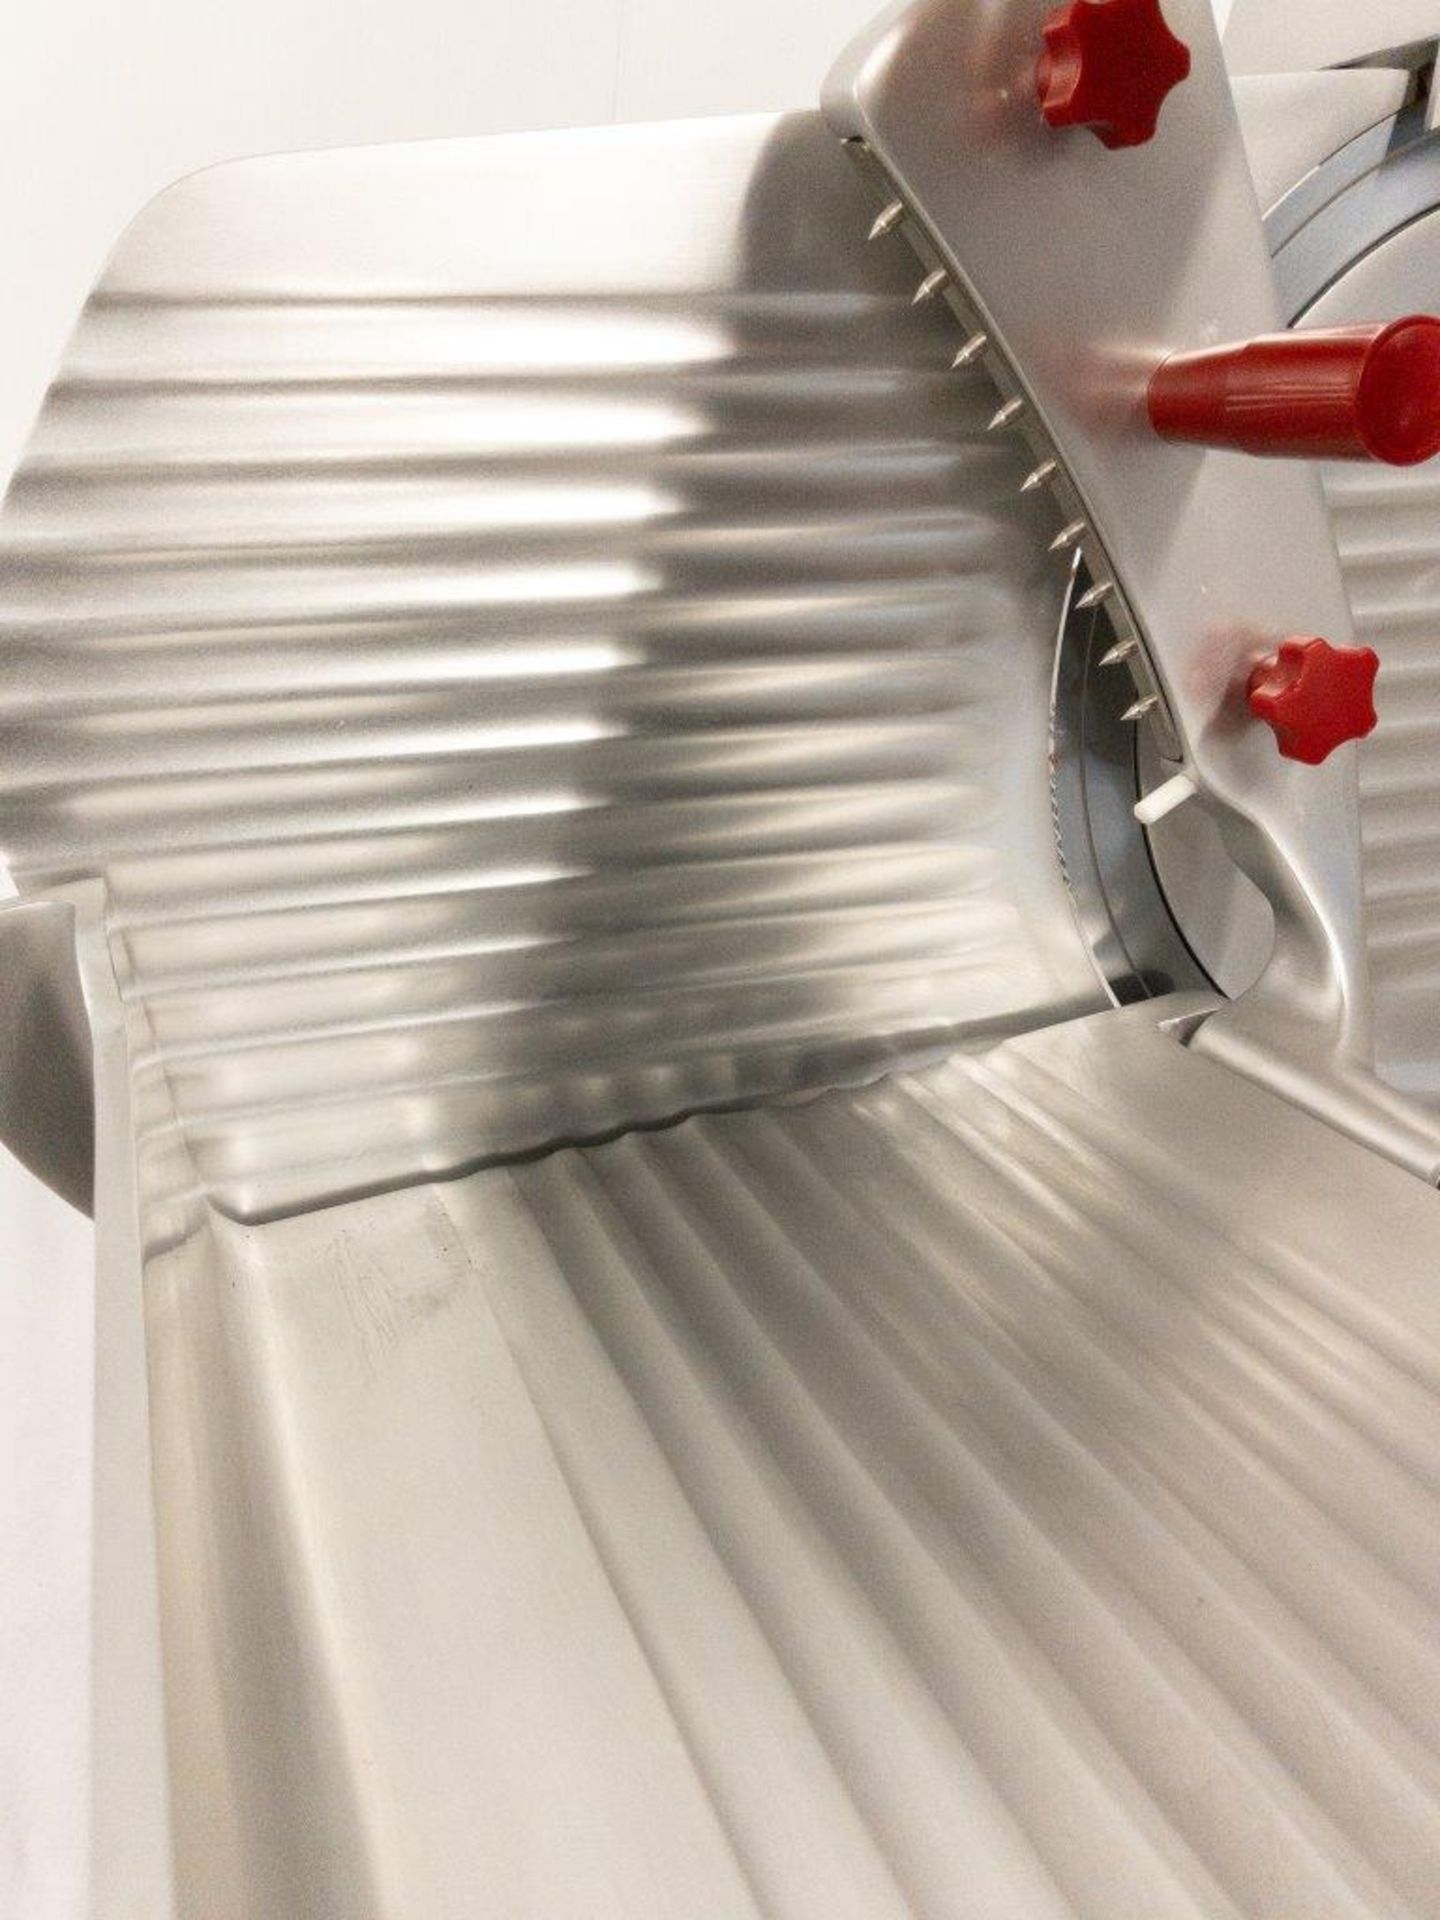 12" GRAVITY MEAT SLICER - MADE IN ITALY, OMCAN F300R M4S - Image 3 of 11